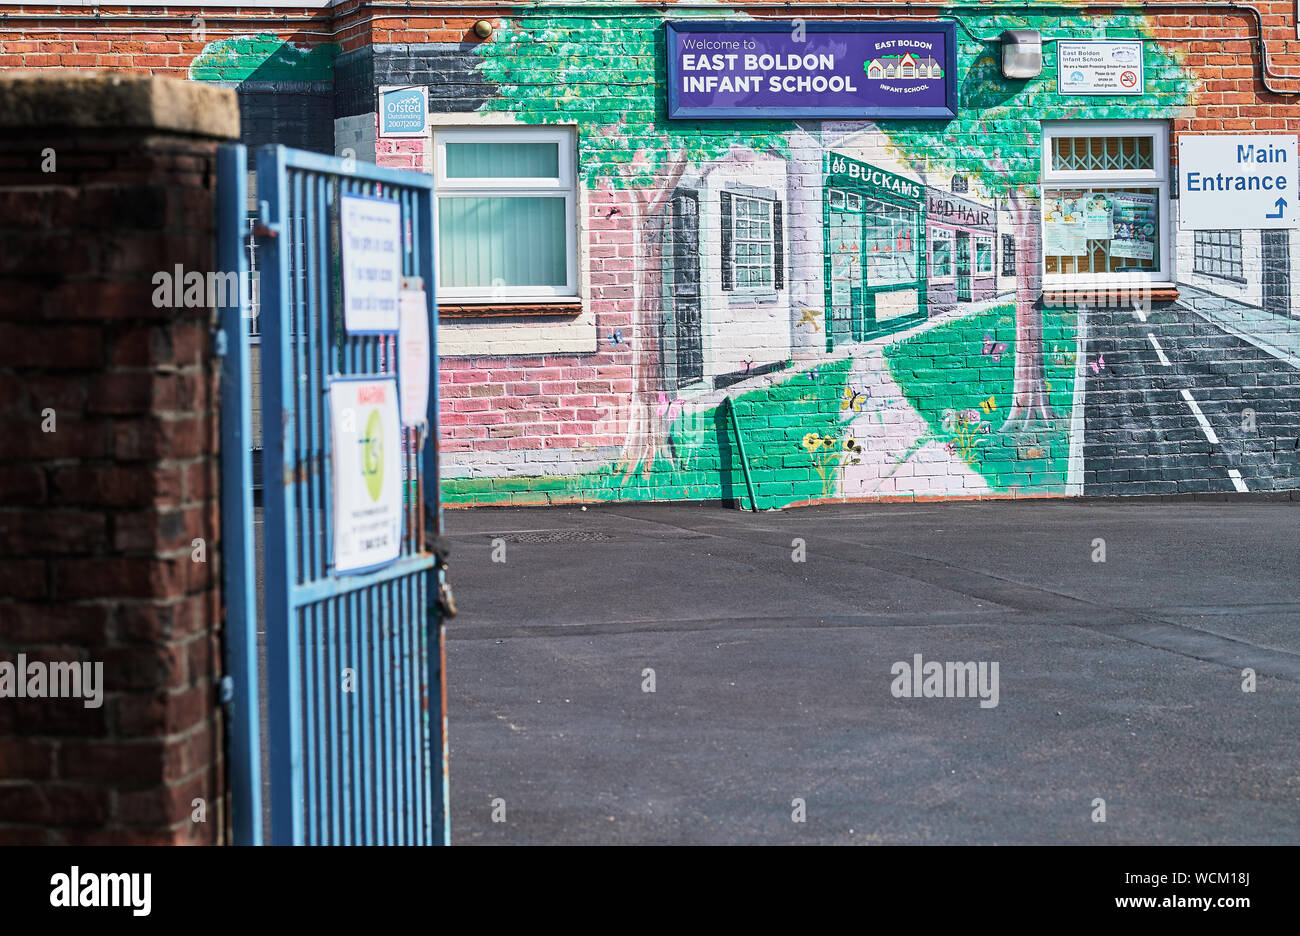 Mural and playground at East Bolden infant school, South Tyneside, England. Stock Photo